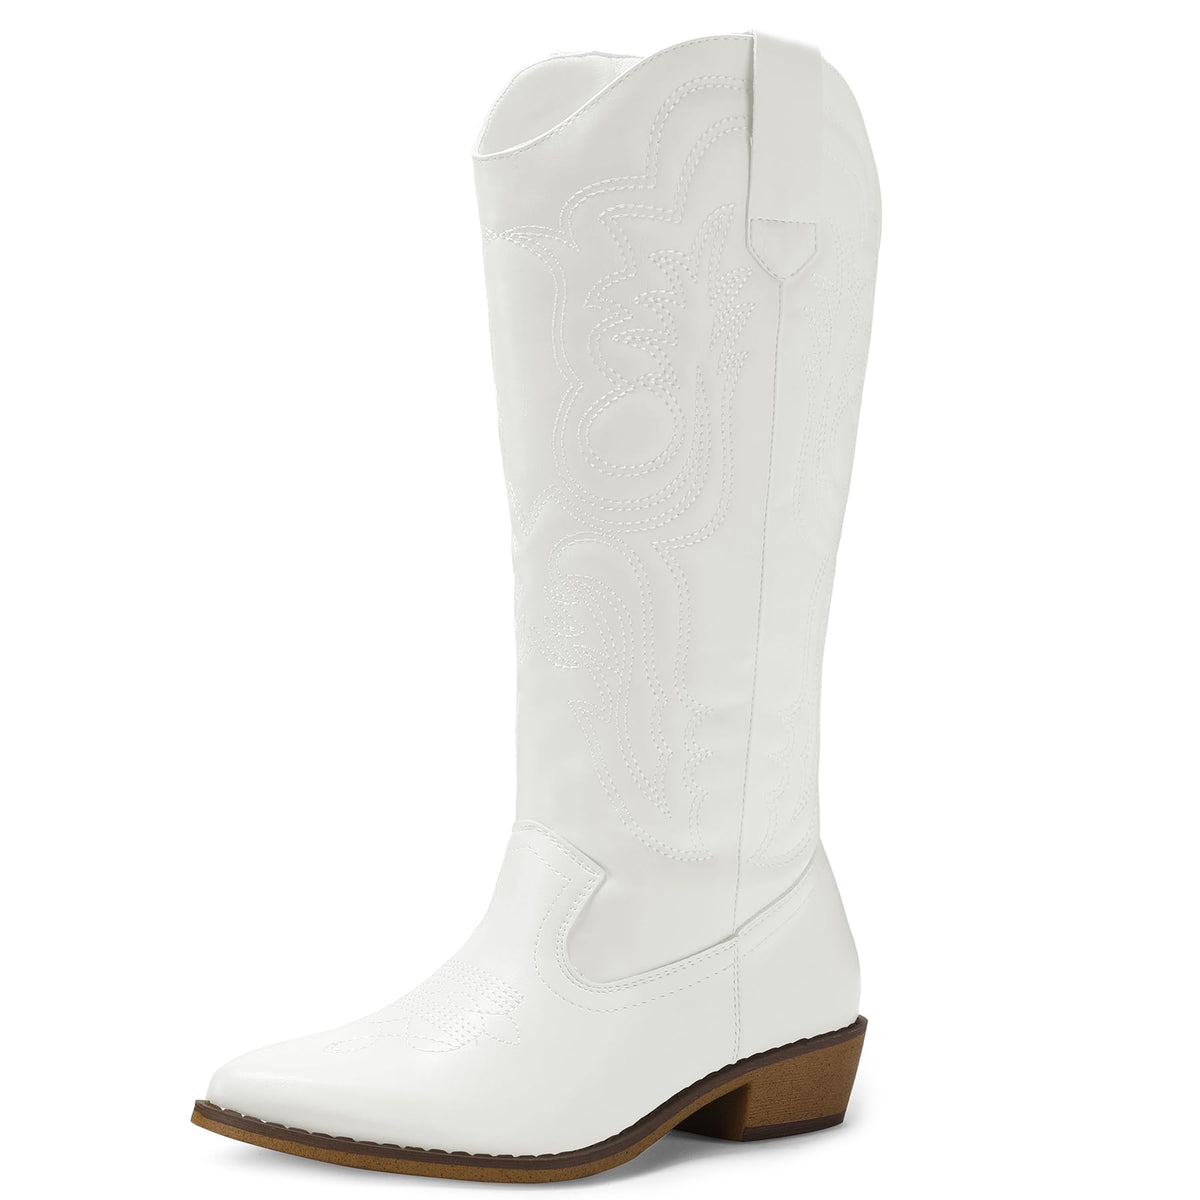 Embroidered Western Knee High Cowboy Boots